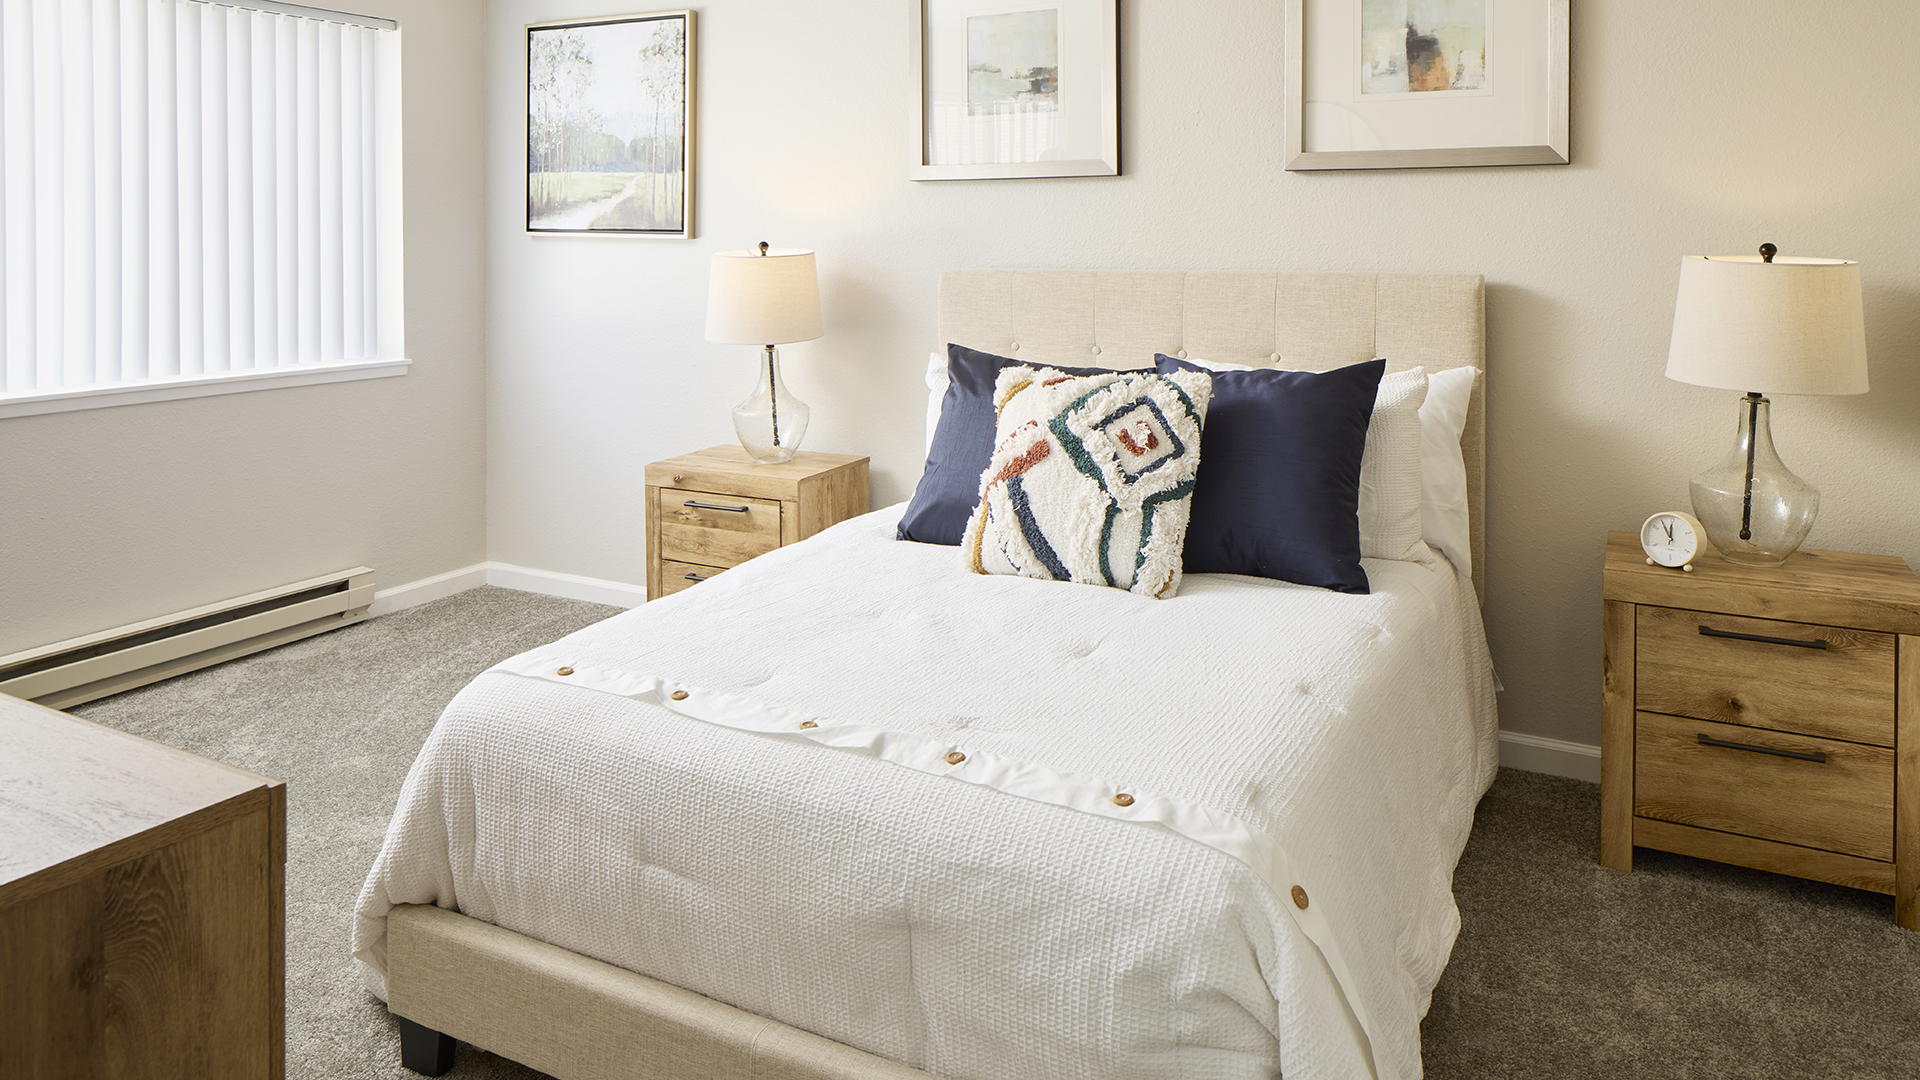 A neatly arranged Holiday Bellevue Garden apartment bedroom with a plush beige bed adorned with decorative pillows, flanked by wooden nightstands and matching table lamps, all under soft natural light